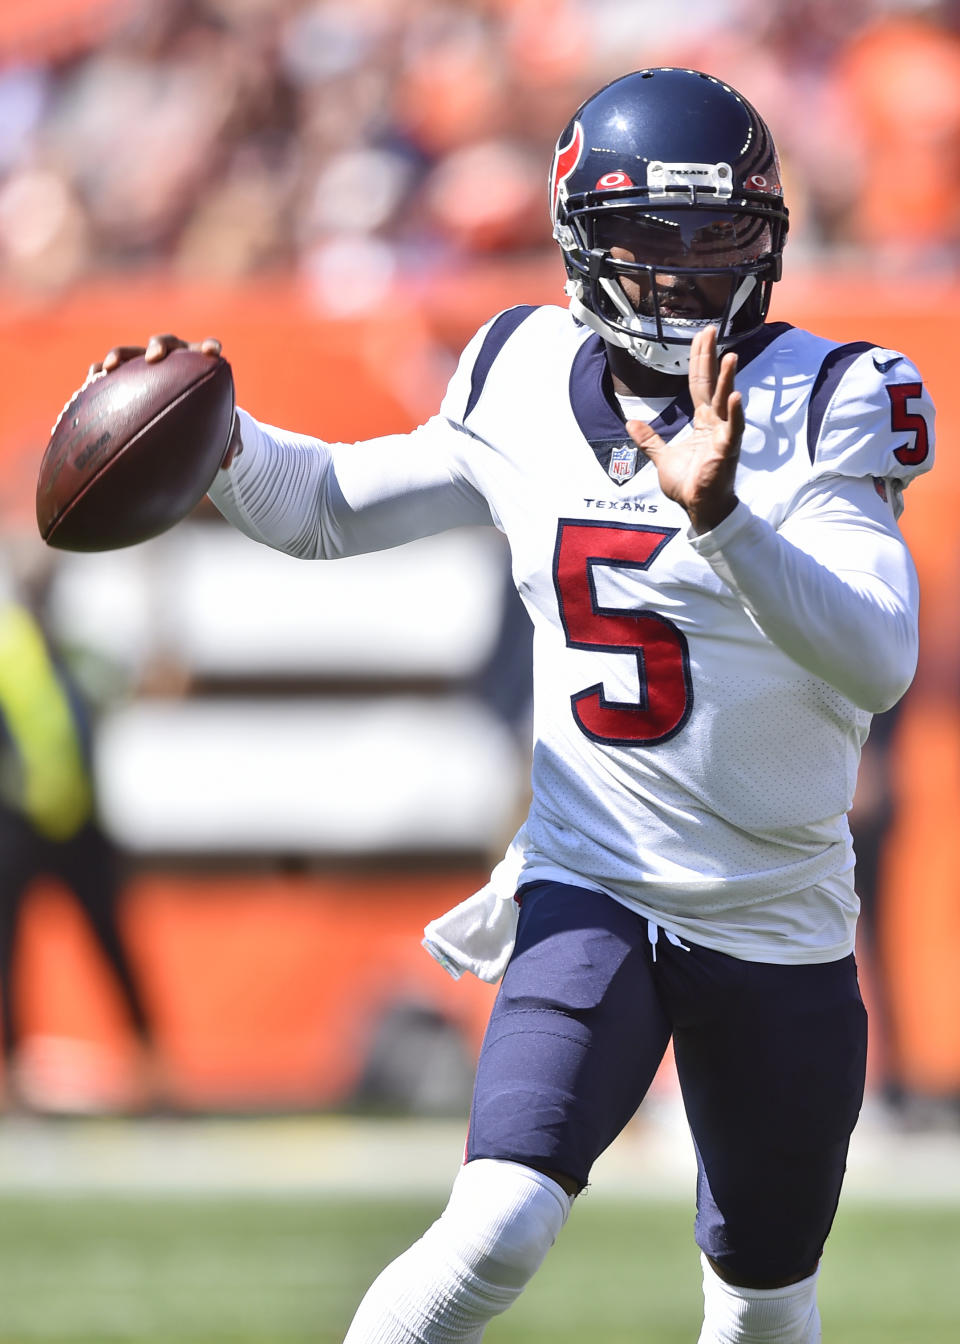 Houston Texans quarterback Tyrod Taylor looks to throw during the first half of an NFL football game against the Cleveland Browns, Sunday, Sept. 19, 2021, in Cleveland. (AP Photo/David Richard)